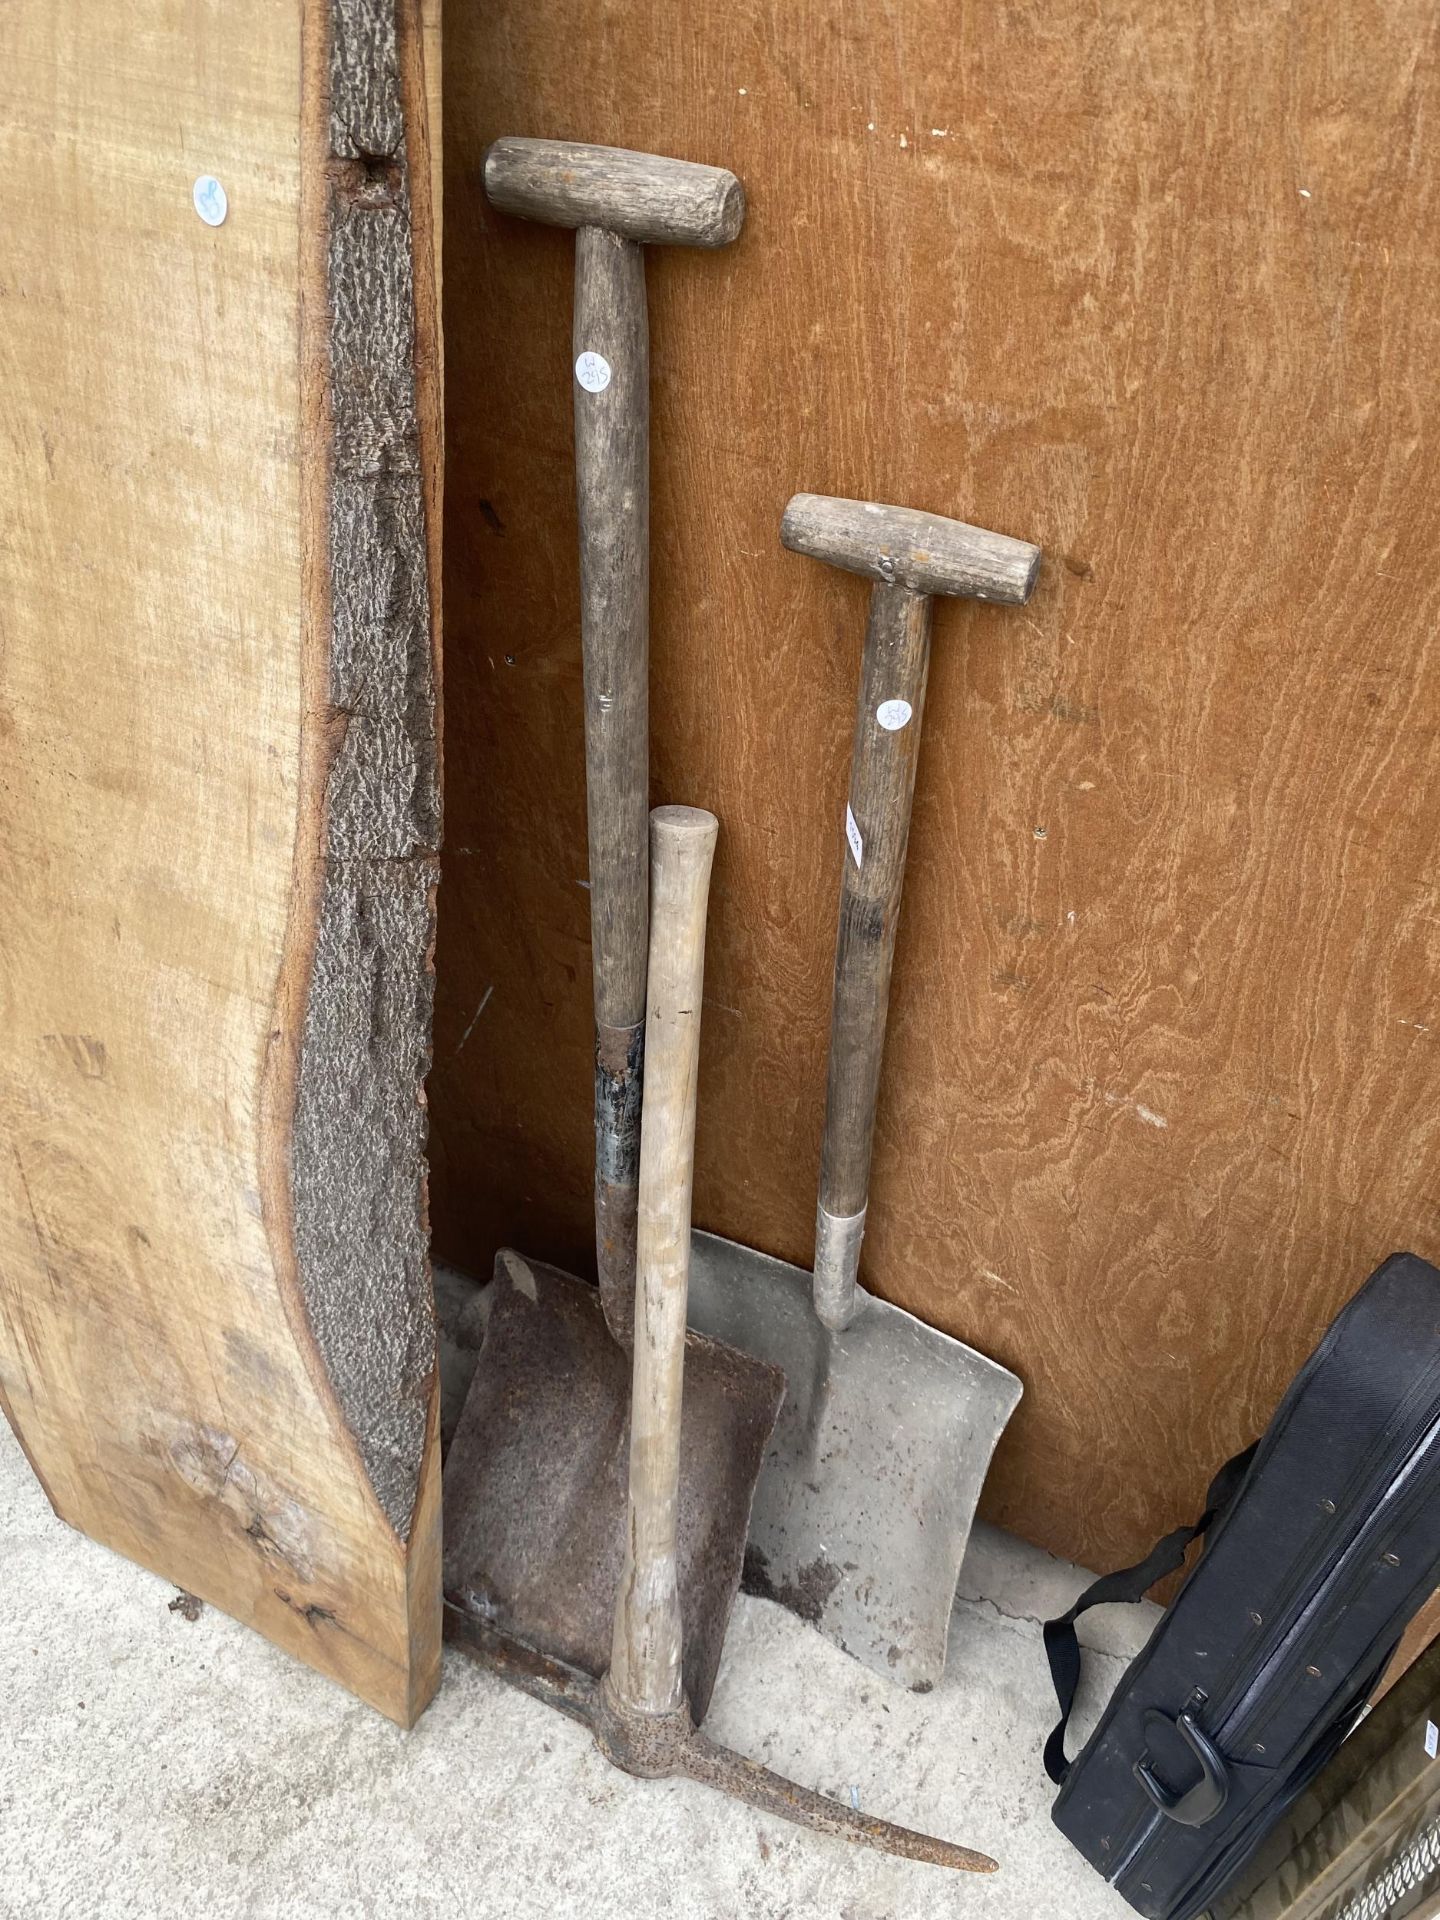 TWO VINTAGE SHOVELS AND A PICK AXE